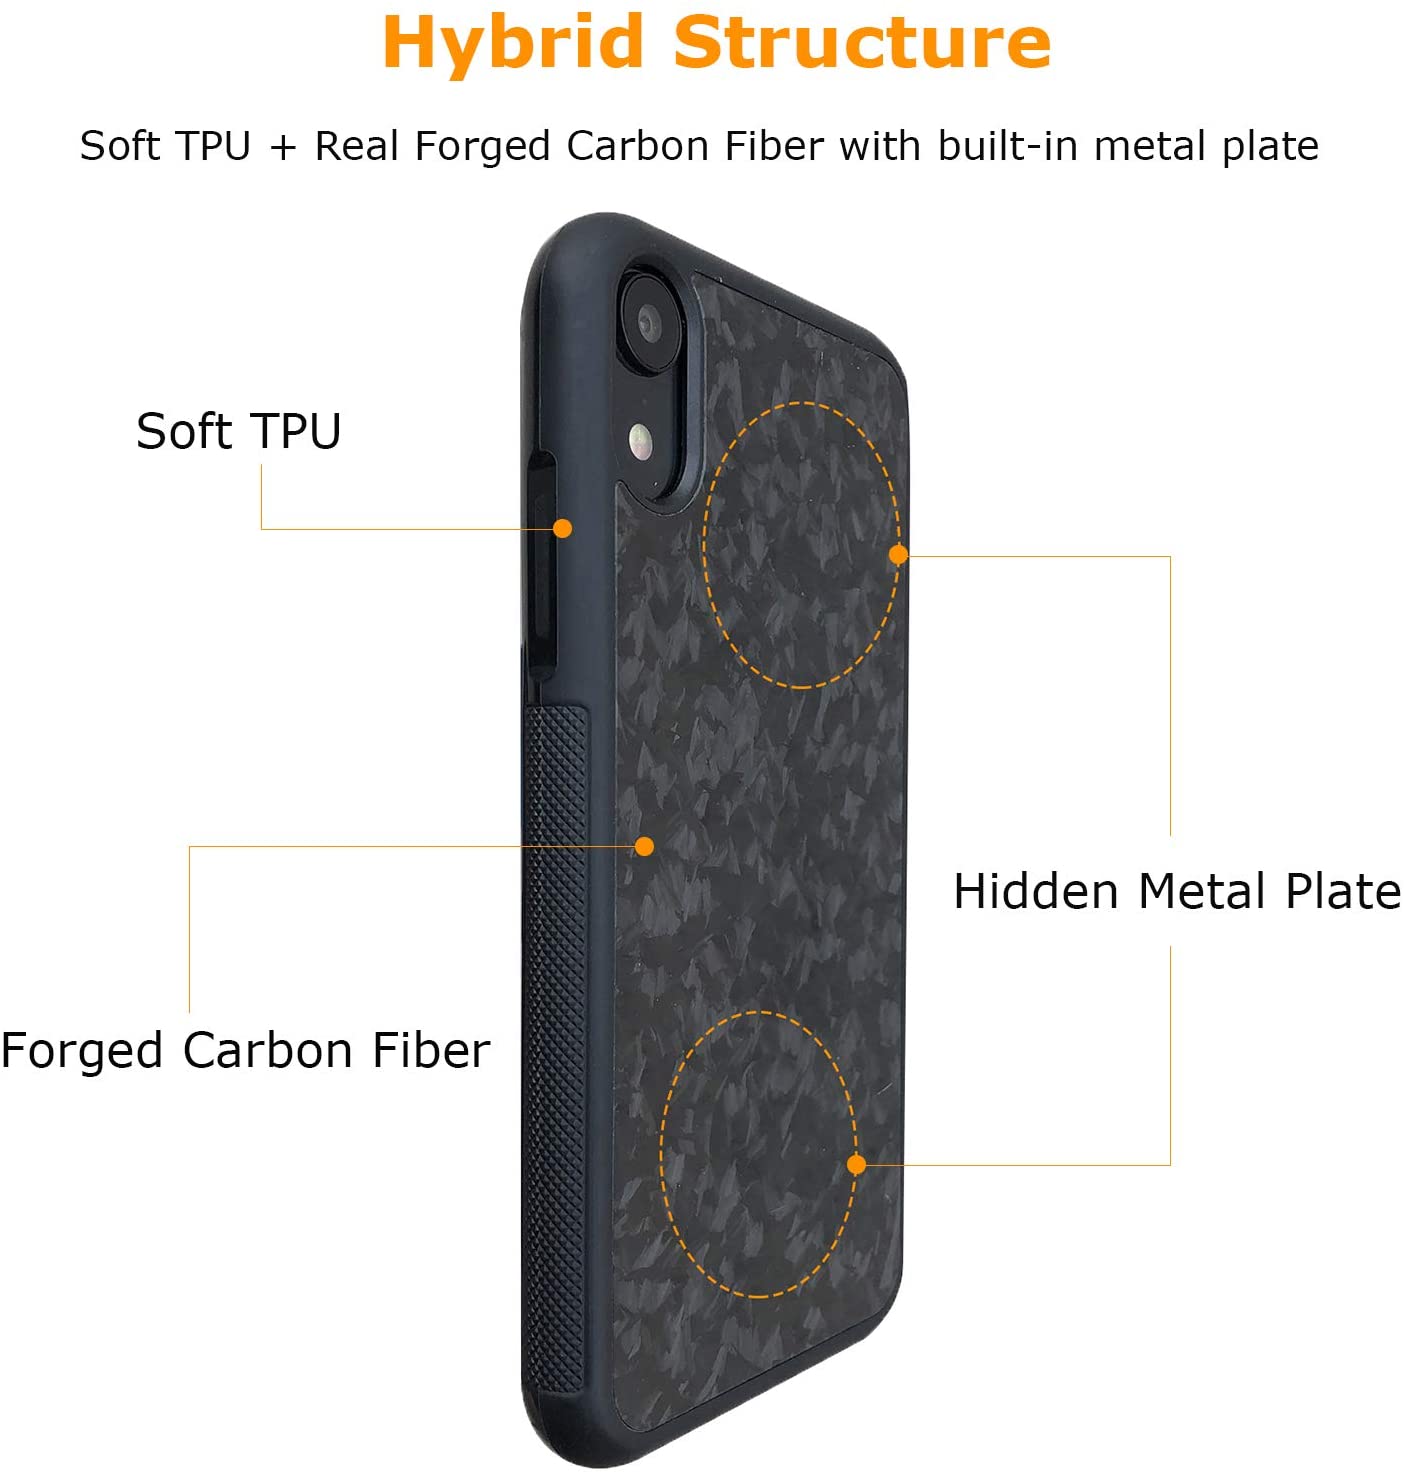 Molzar Grip Series iPhone XR with Real Forged Carbon Case - Molzar-iphone cases and accessories